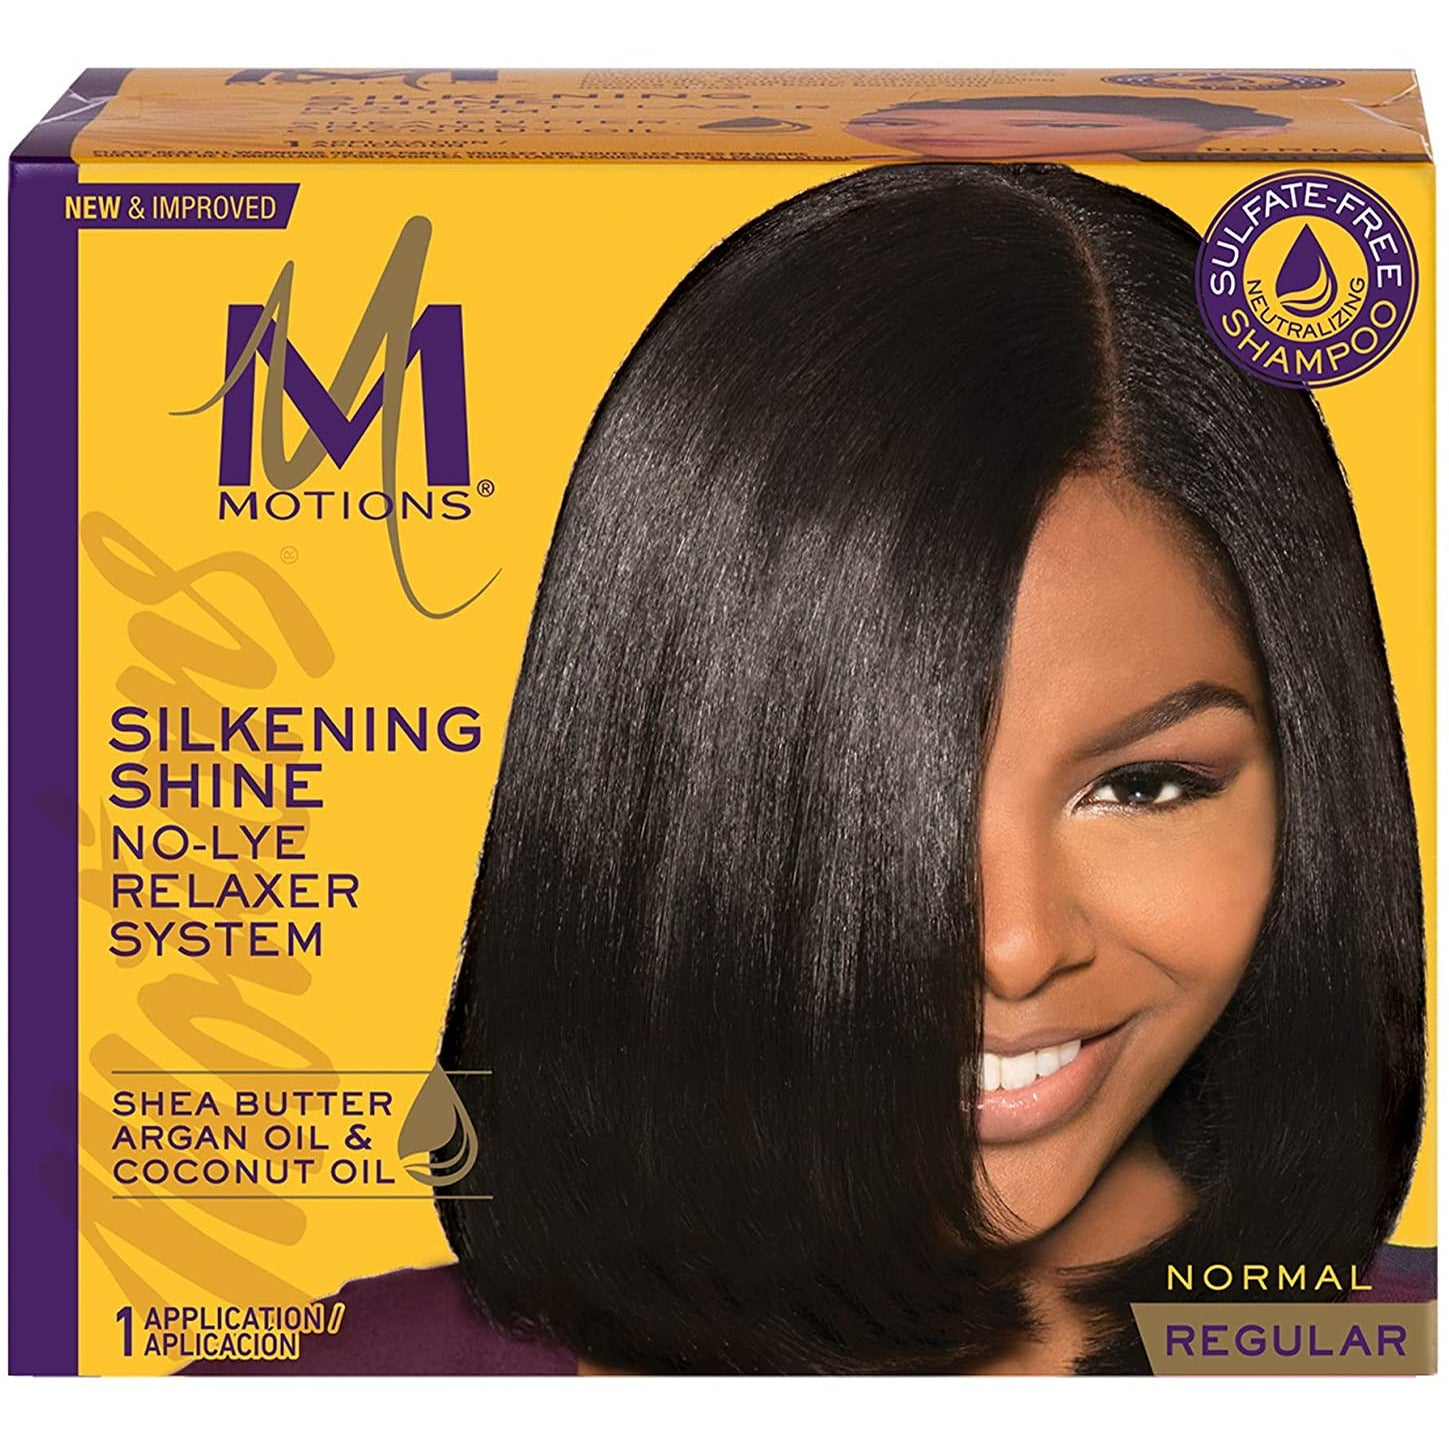 MOTIONS SHINE FULL RELAXER KIT NORMAL-Motions- Hive Beauty Supply